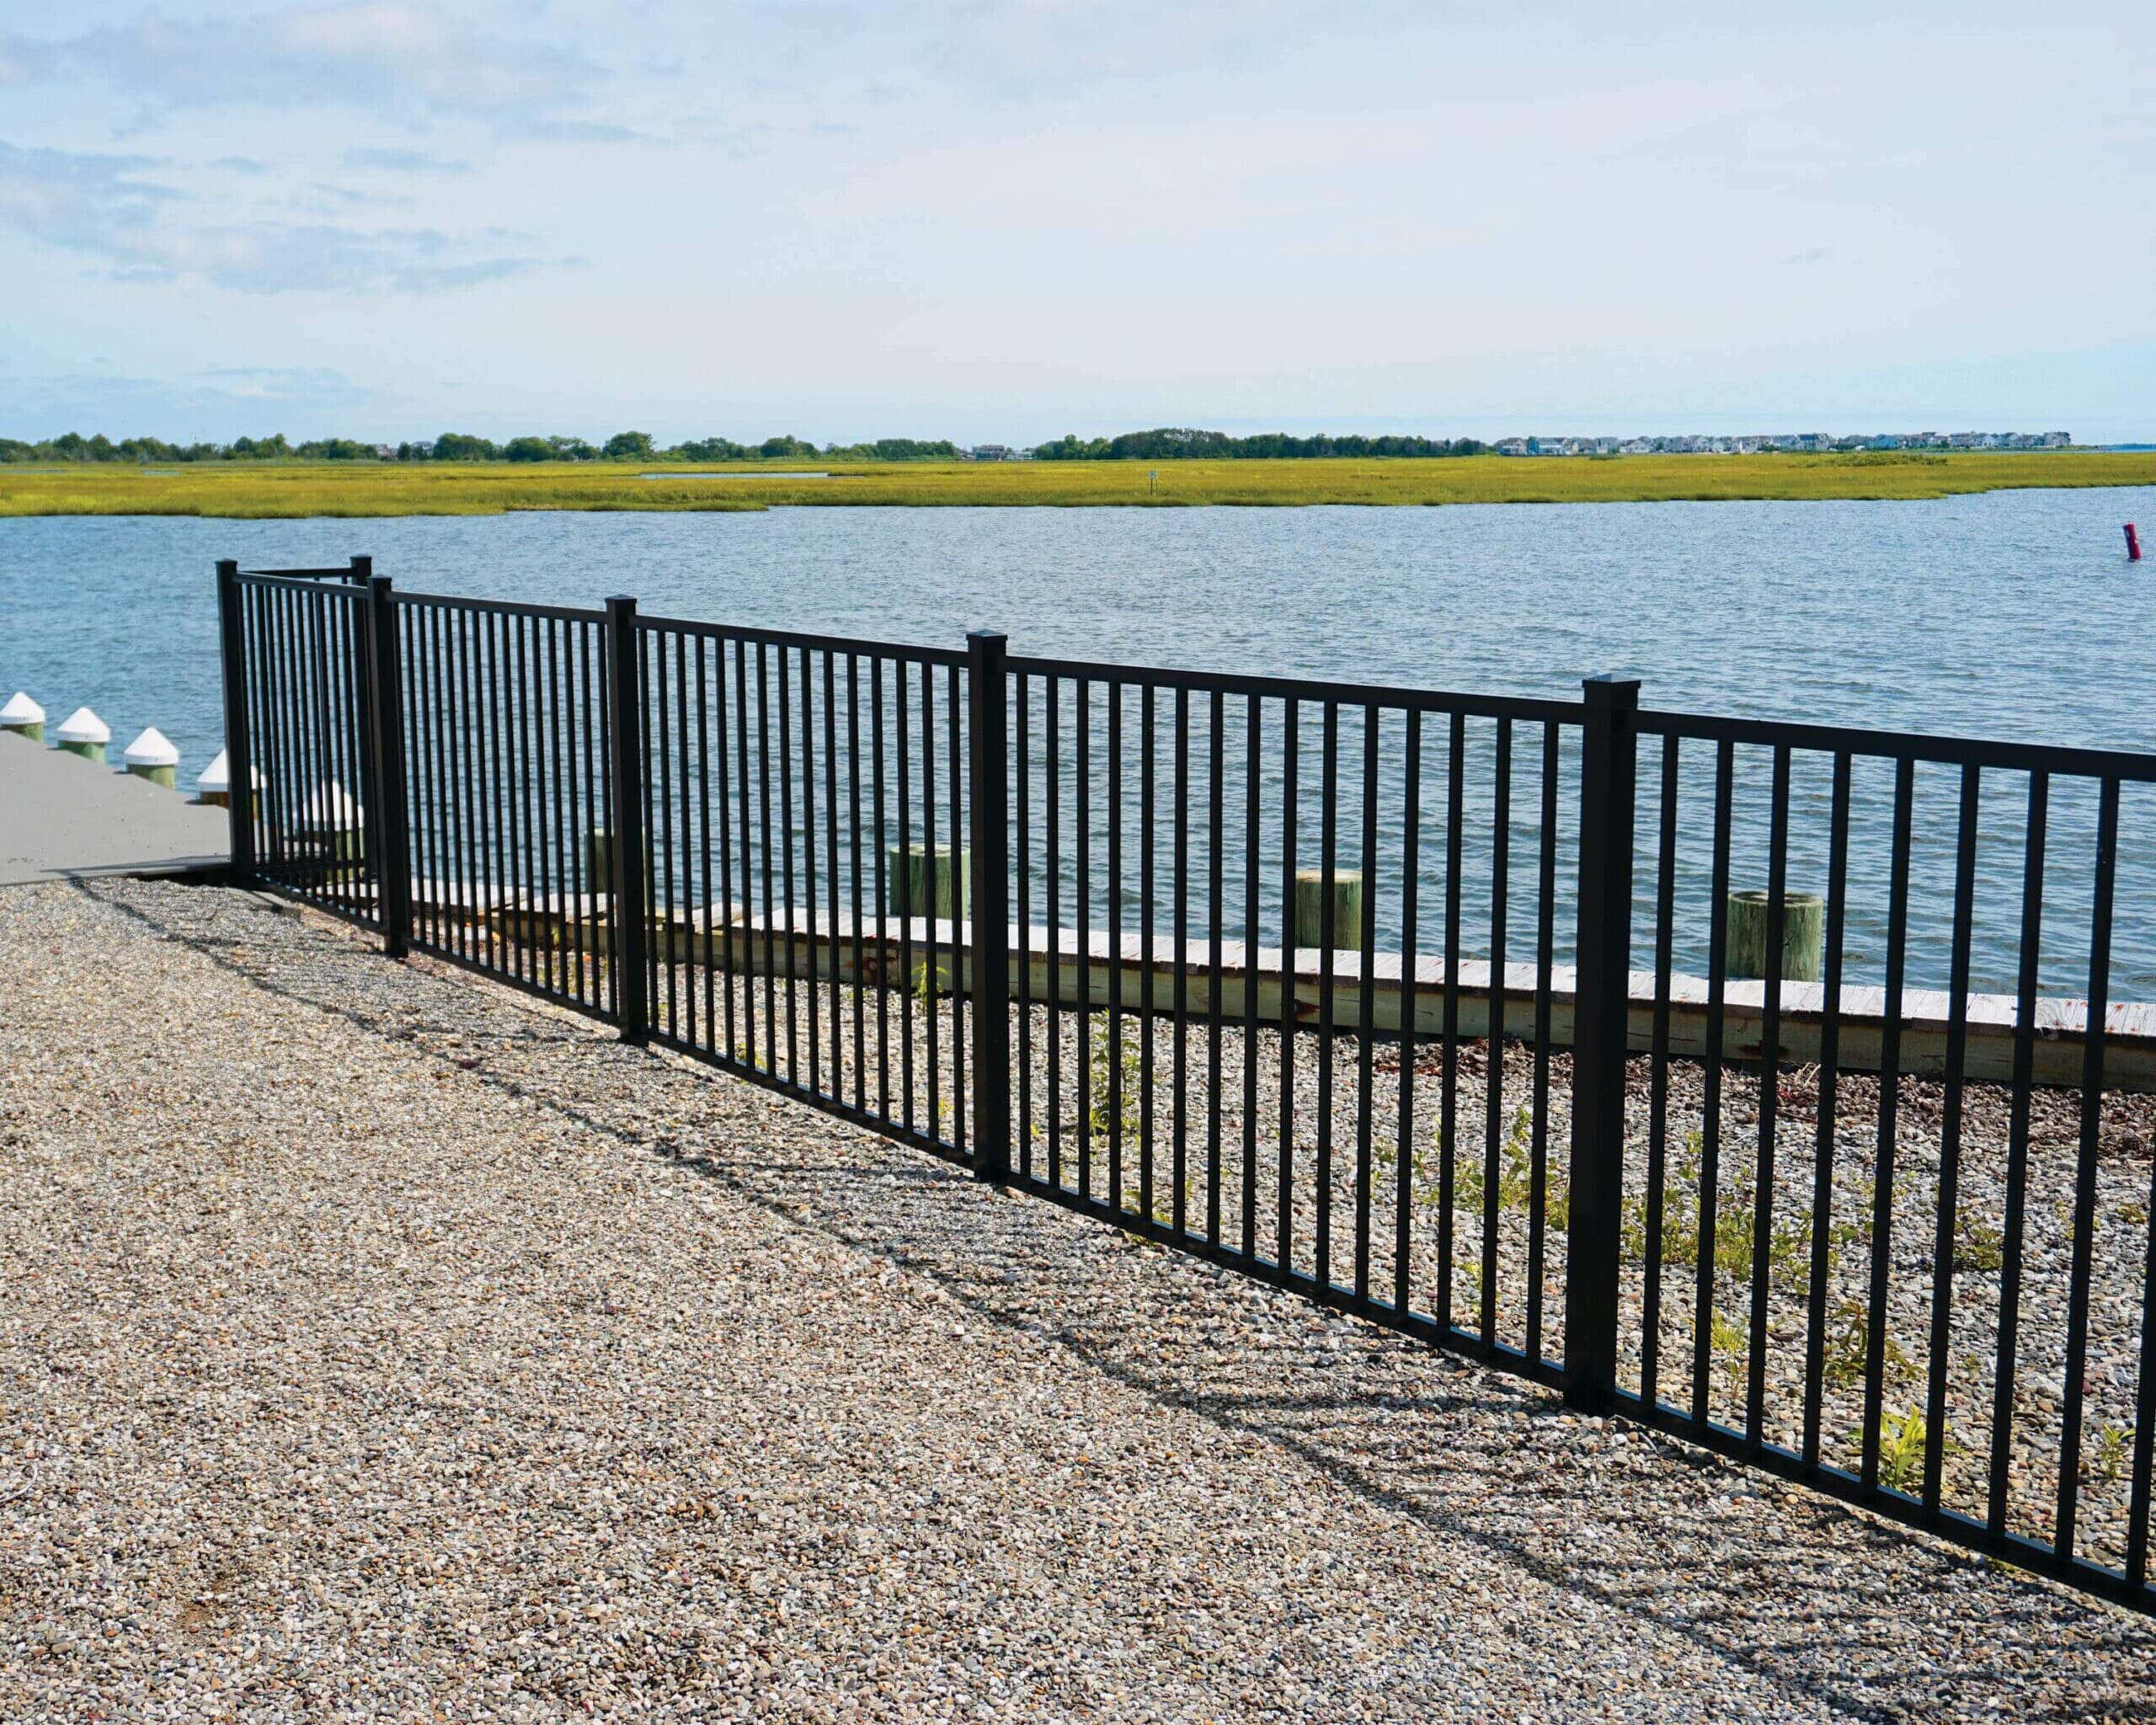 The edge of a property on the bay, with the dock and seawater in the background. The property is lined with Active Yards Bedrock aluminum fencing.